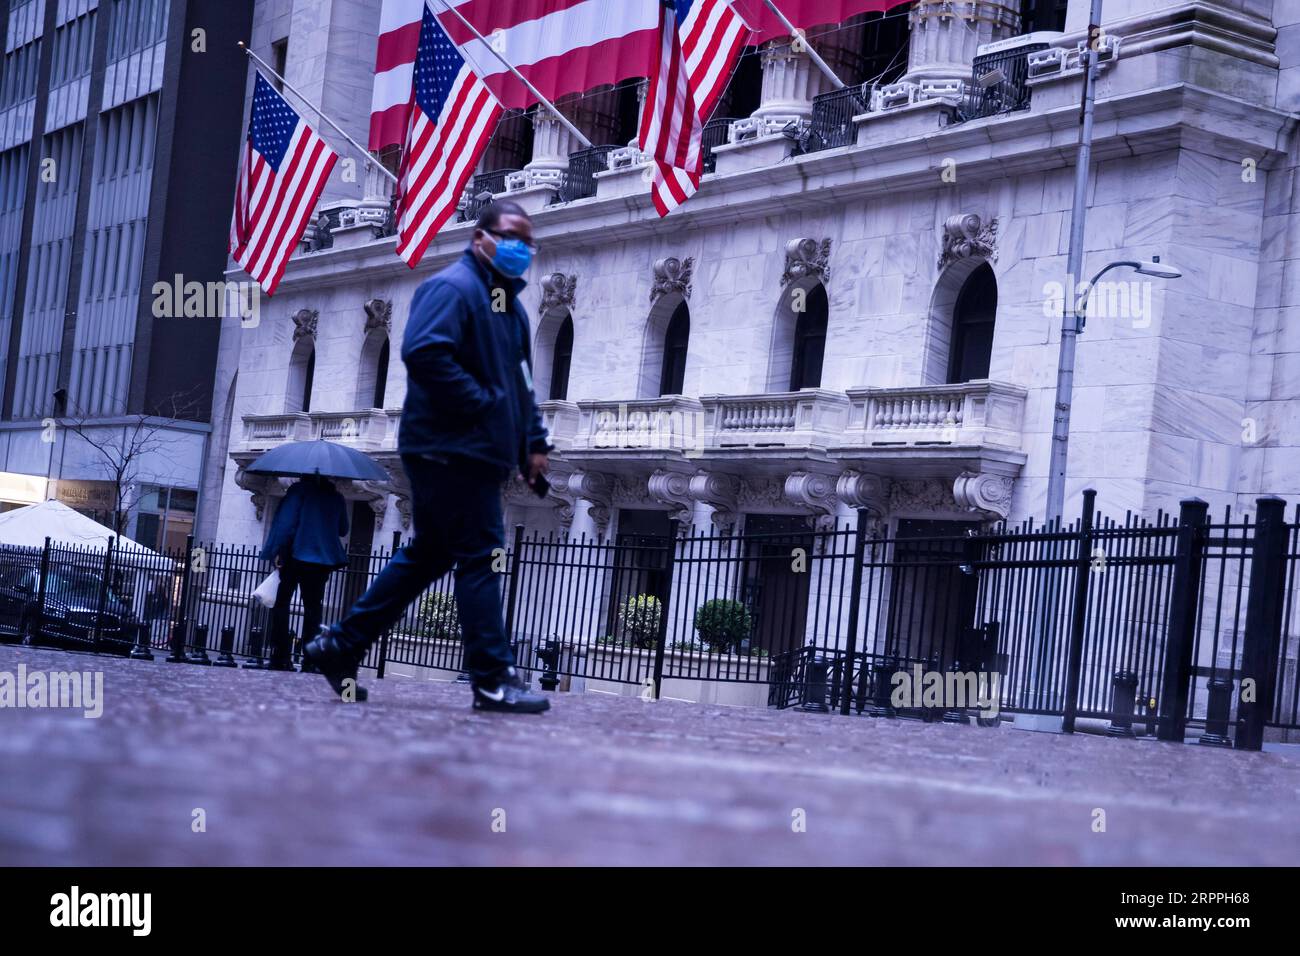 200318 -- NEW YORK, March 18, 2020 -- A pedestrian passes by the New York Stock Exchange NYSE in New York, the United States, March 17, 2020. The number of COVID-19 cases in the United States has topped 6,000 by 7 p.m. local time Tuesday 2300 GMT, according to the Center for Systems Science and Engineering at Johns Hopkins University. The fresh figure reached 6,233, increasing over 1,000 within about 7 hours. A total of 105 deaths have been reported across the country. Photo by /Xinhua U.S.-NEW YORK-COVID-19-CONFIRMED CASES MichaelxNagle PUBLICATIONxNOTxINxCHN Stock Photo